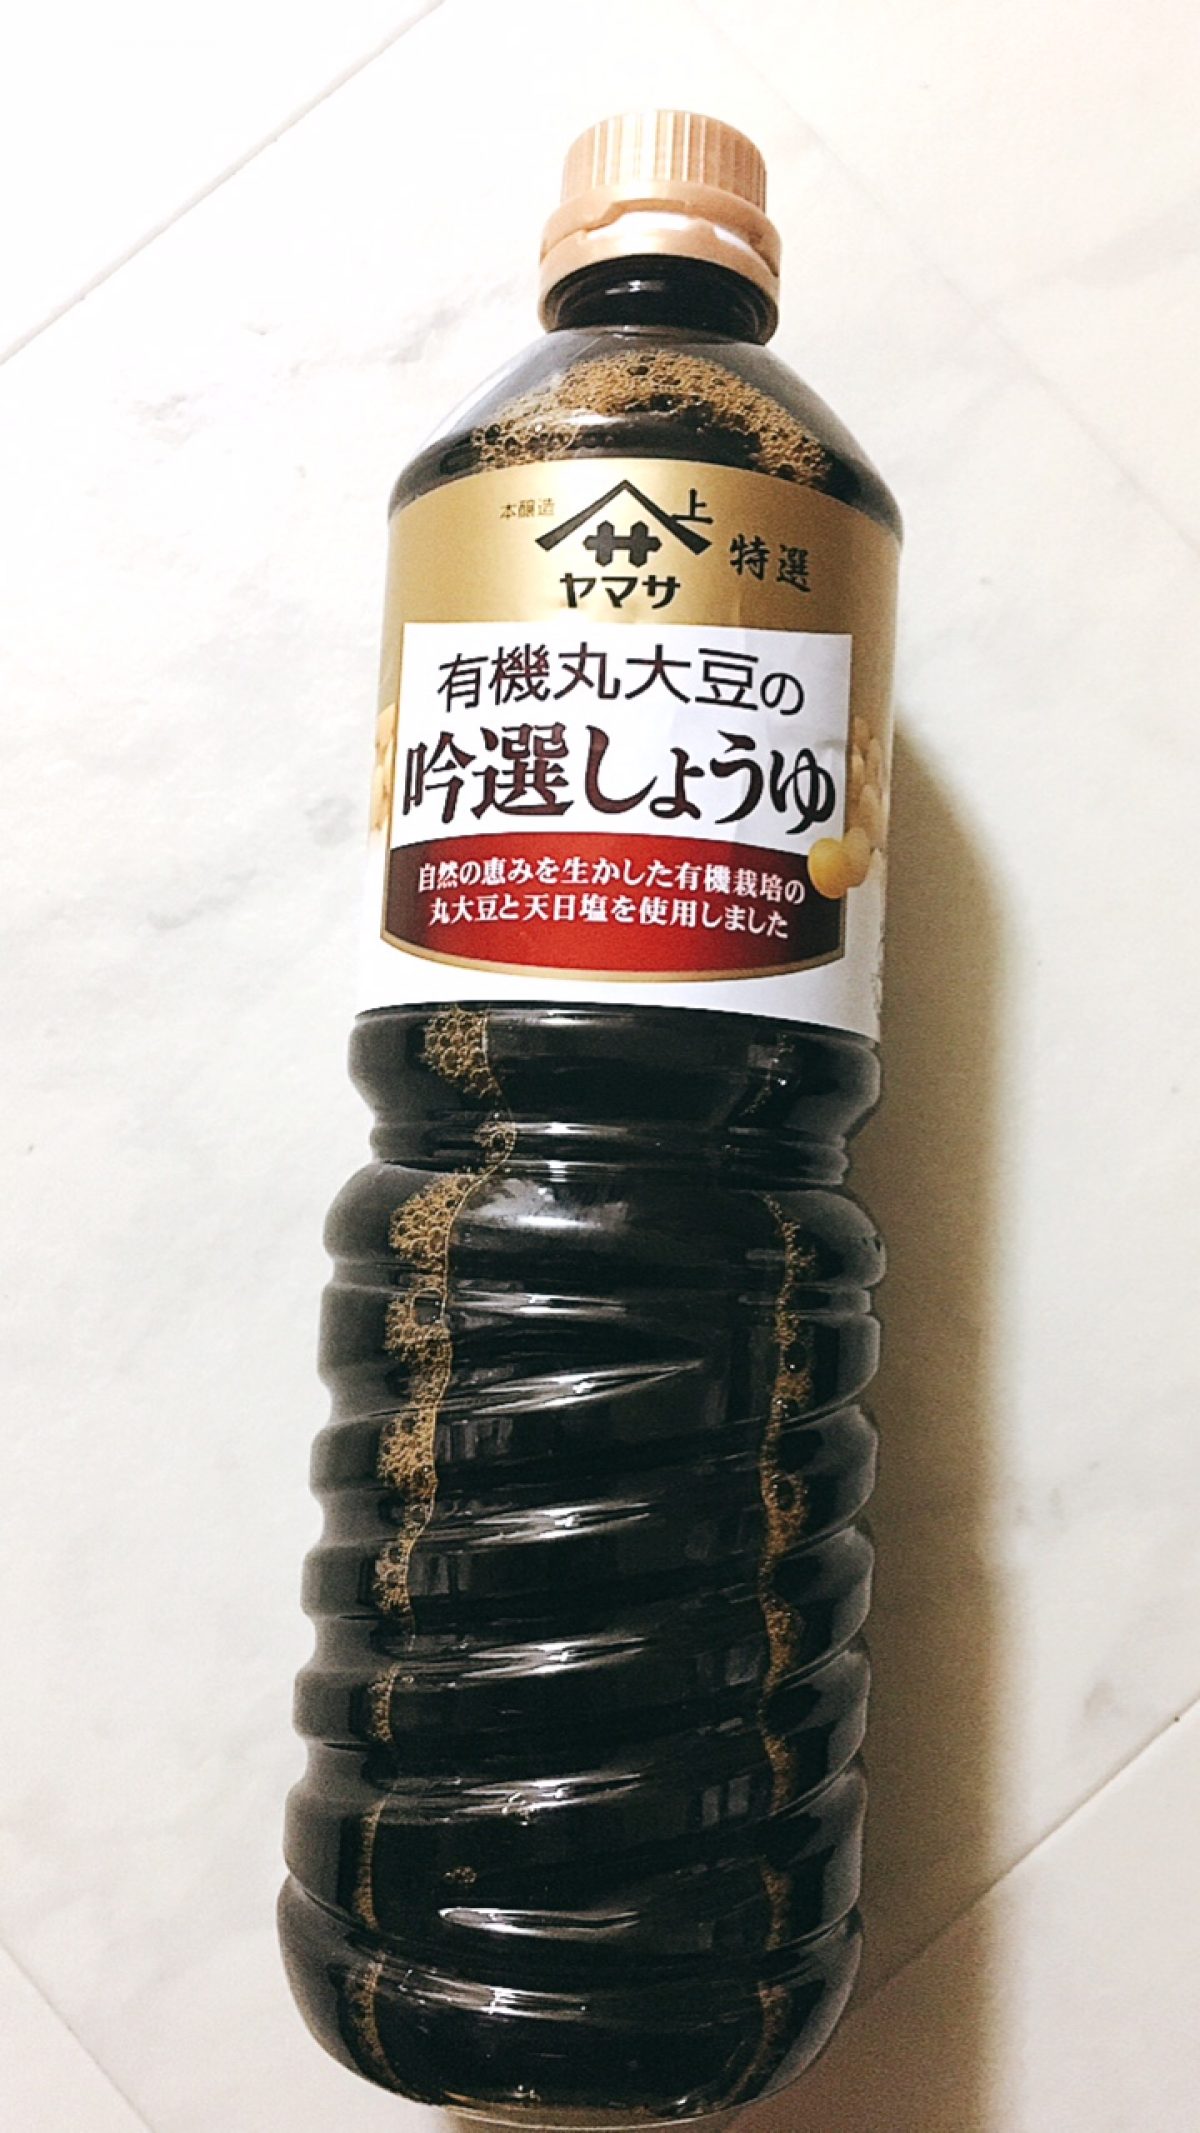 Finding A Non Alcoholic Soy Sauce In Japan How To Live In Japan